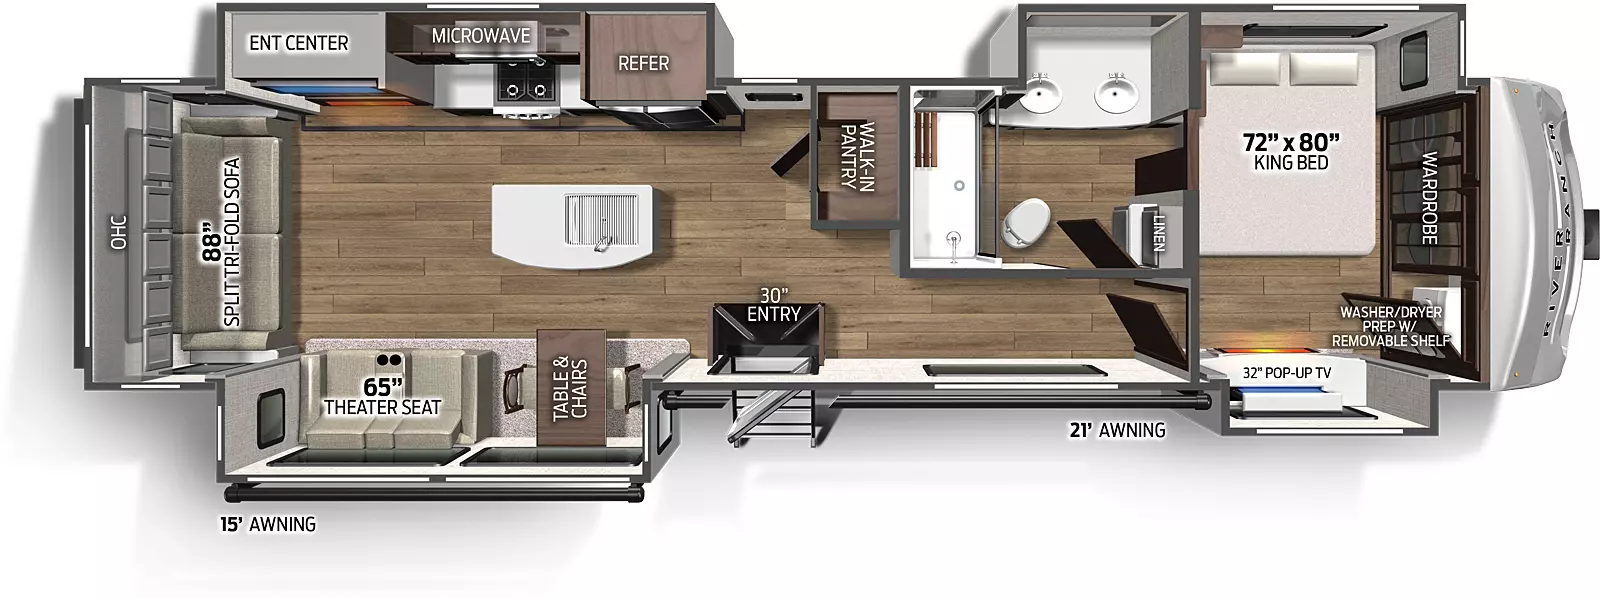 The 390RL has 3 slide outs, two on the road side and one on the camp side, along with one entry door on the camp side. Interior layout from front to back: front bedroom with king bed in the road side slide out; side aisle bathroom; kitchen living dining area with road side slide out containing cooktop and oven, overhead microwave, residential refrigerator, and TV entertainment area; the camp side slide containing freestanding table and chairs and theater seating; kitchen island with double basin sink.